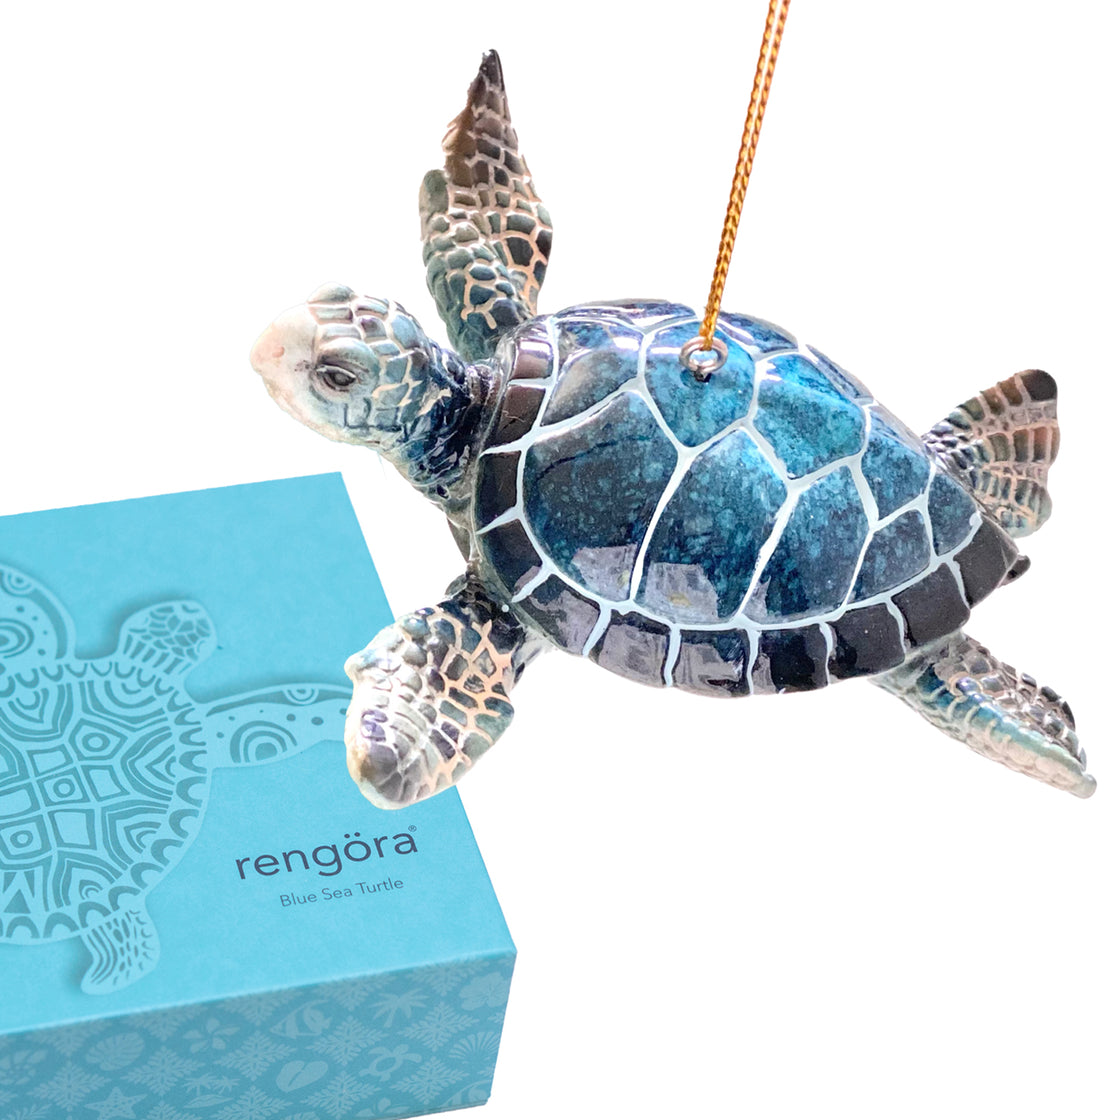 blue sea turtle Christmas ornament shown with its customized blue box by rengöra